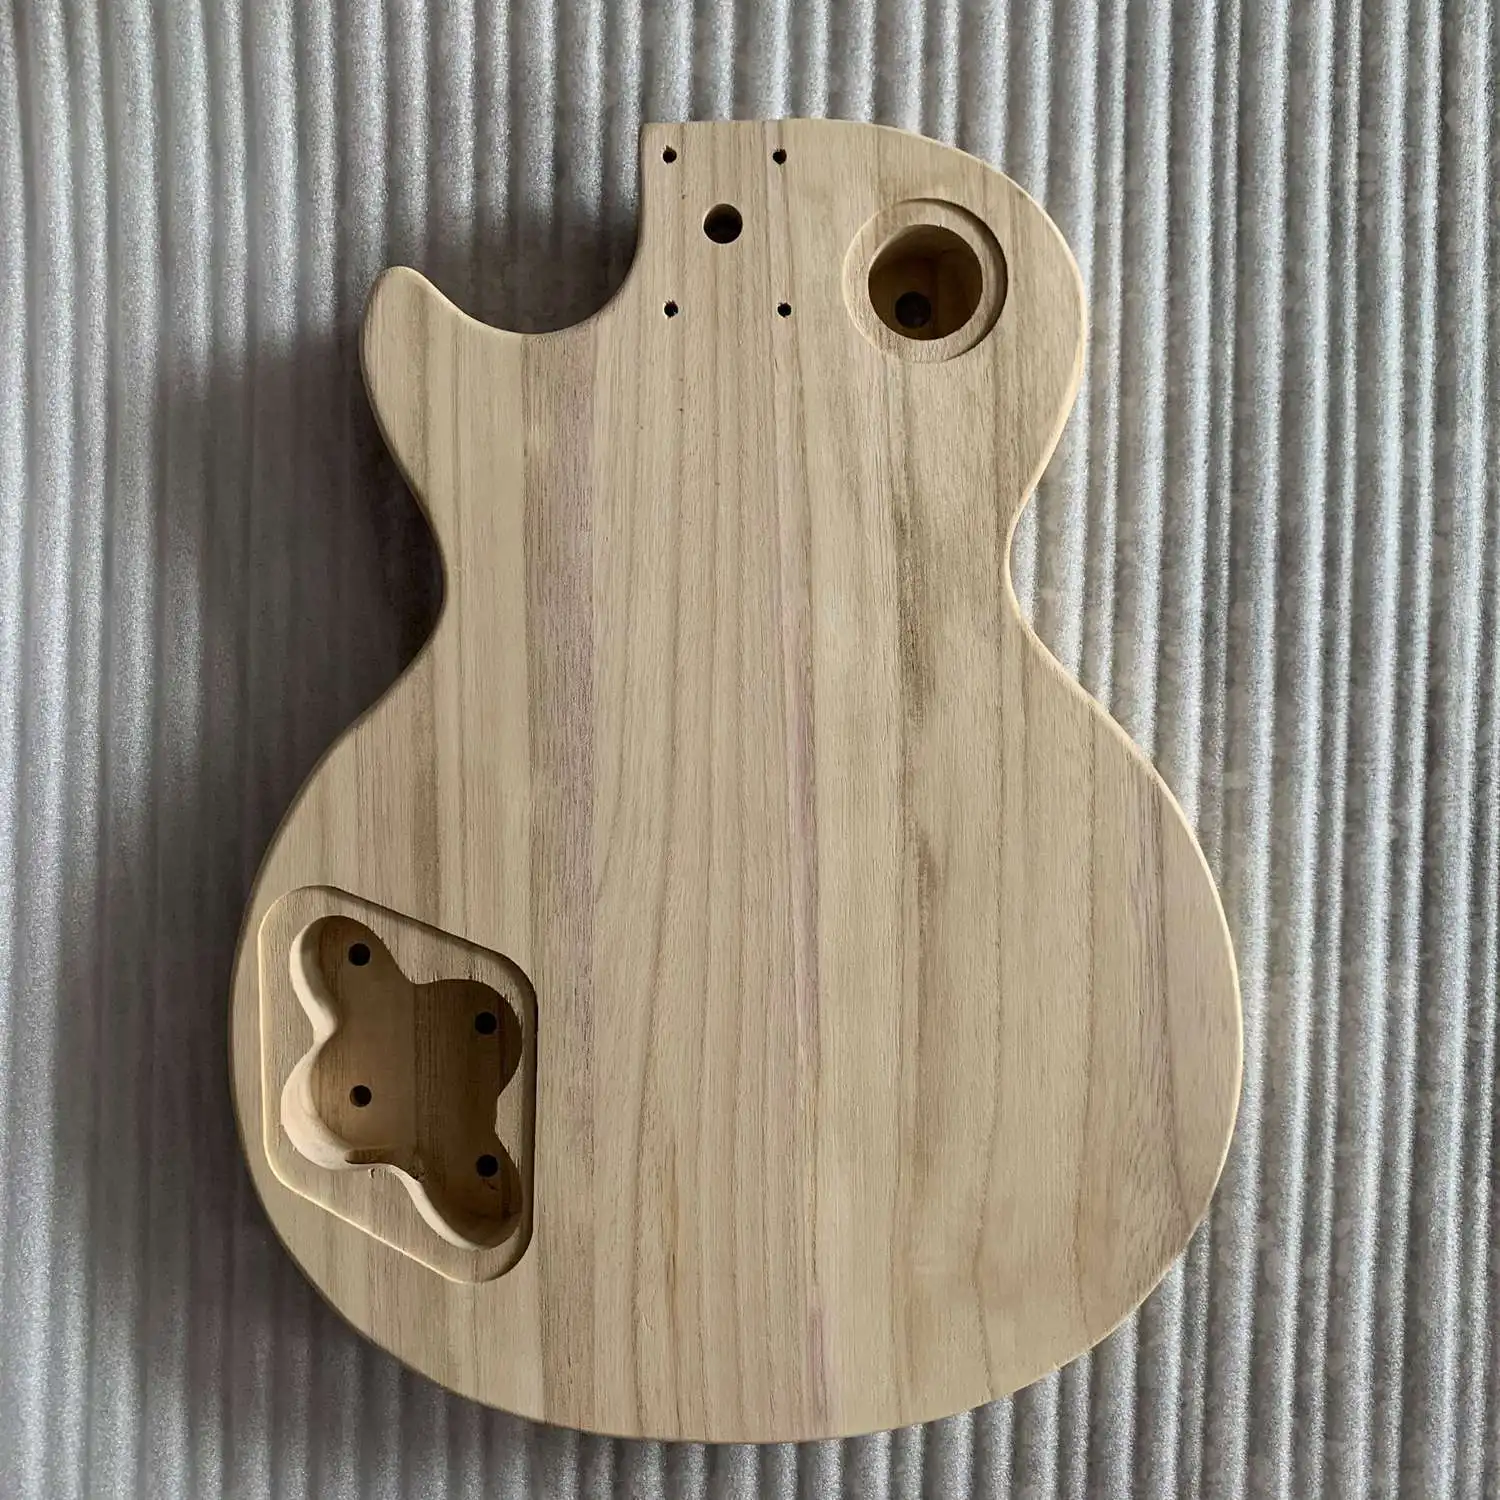 

Unfinished Handcrafted Guitar Body Candlenut Wood Electric Guitar Body Guitar Barrel Replacement Parts